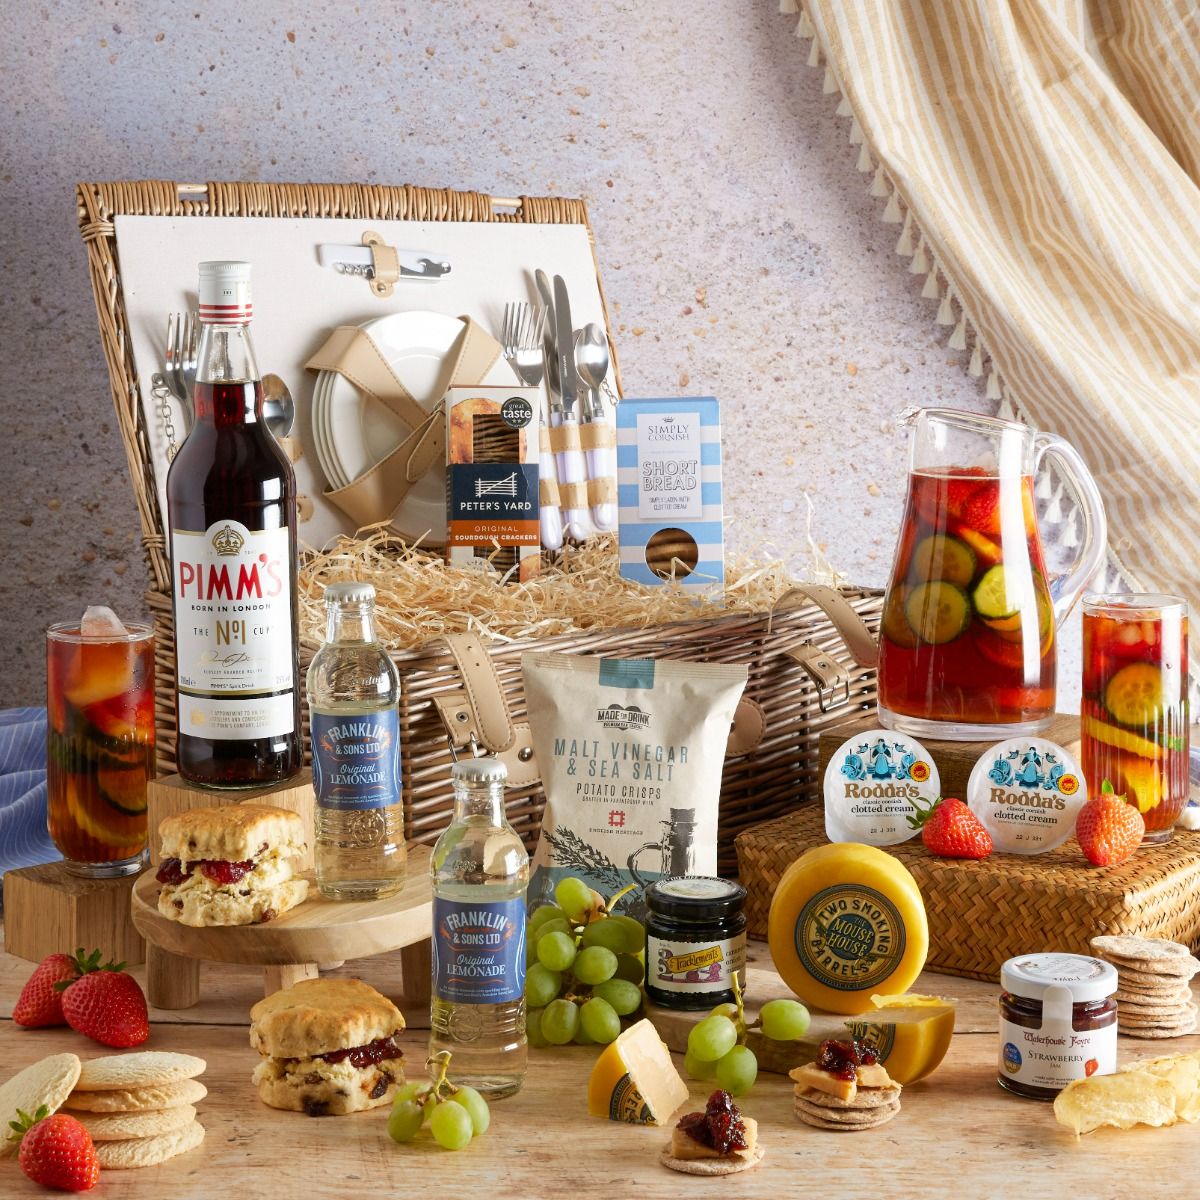 British Pimm's Picnic Hamper with contents on display